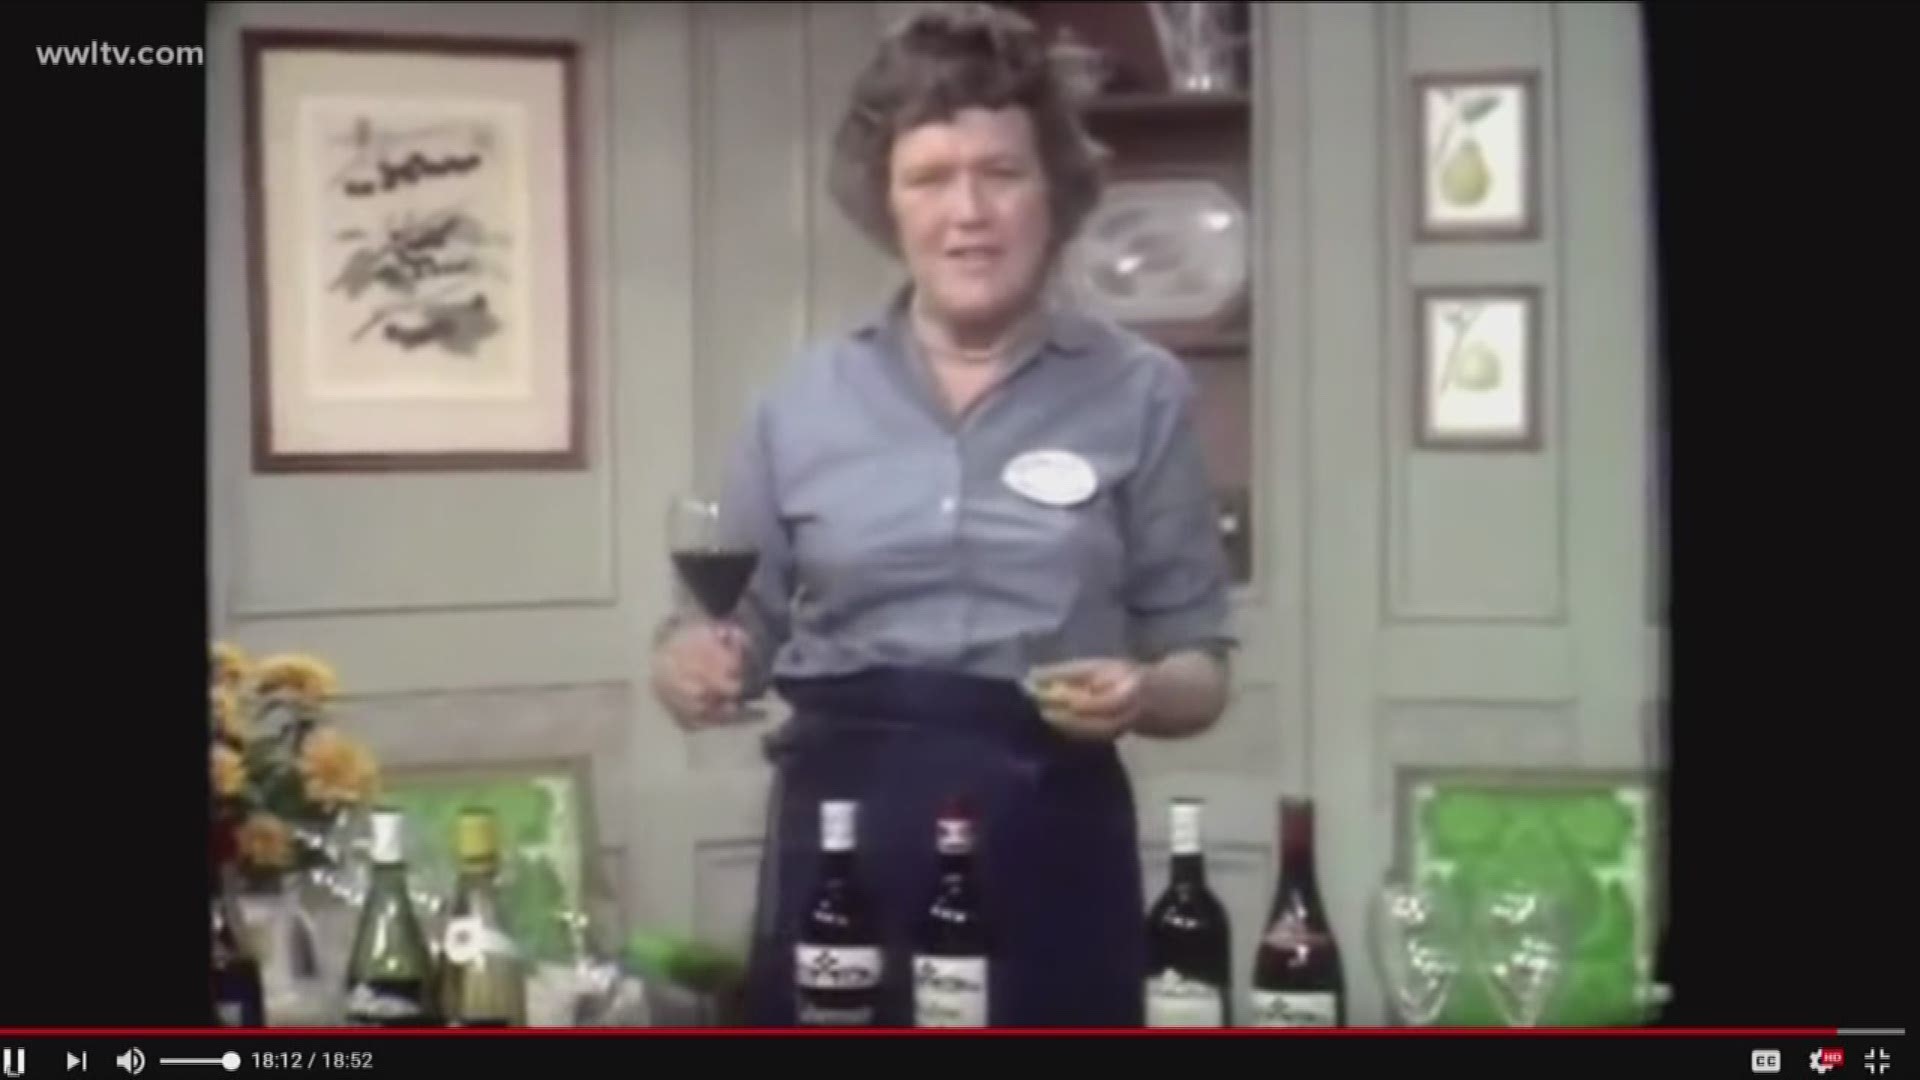 Chef Kevin and Katie is celebrating Julia Child's birthday by making her famous Chicken Salad.